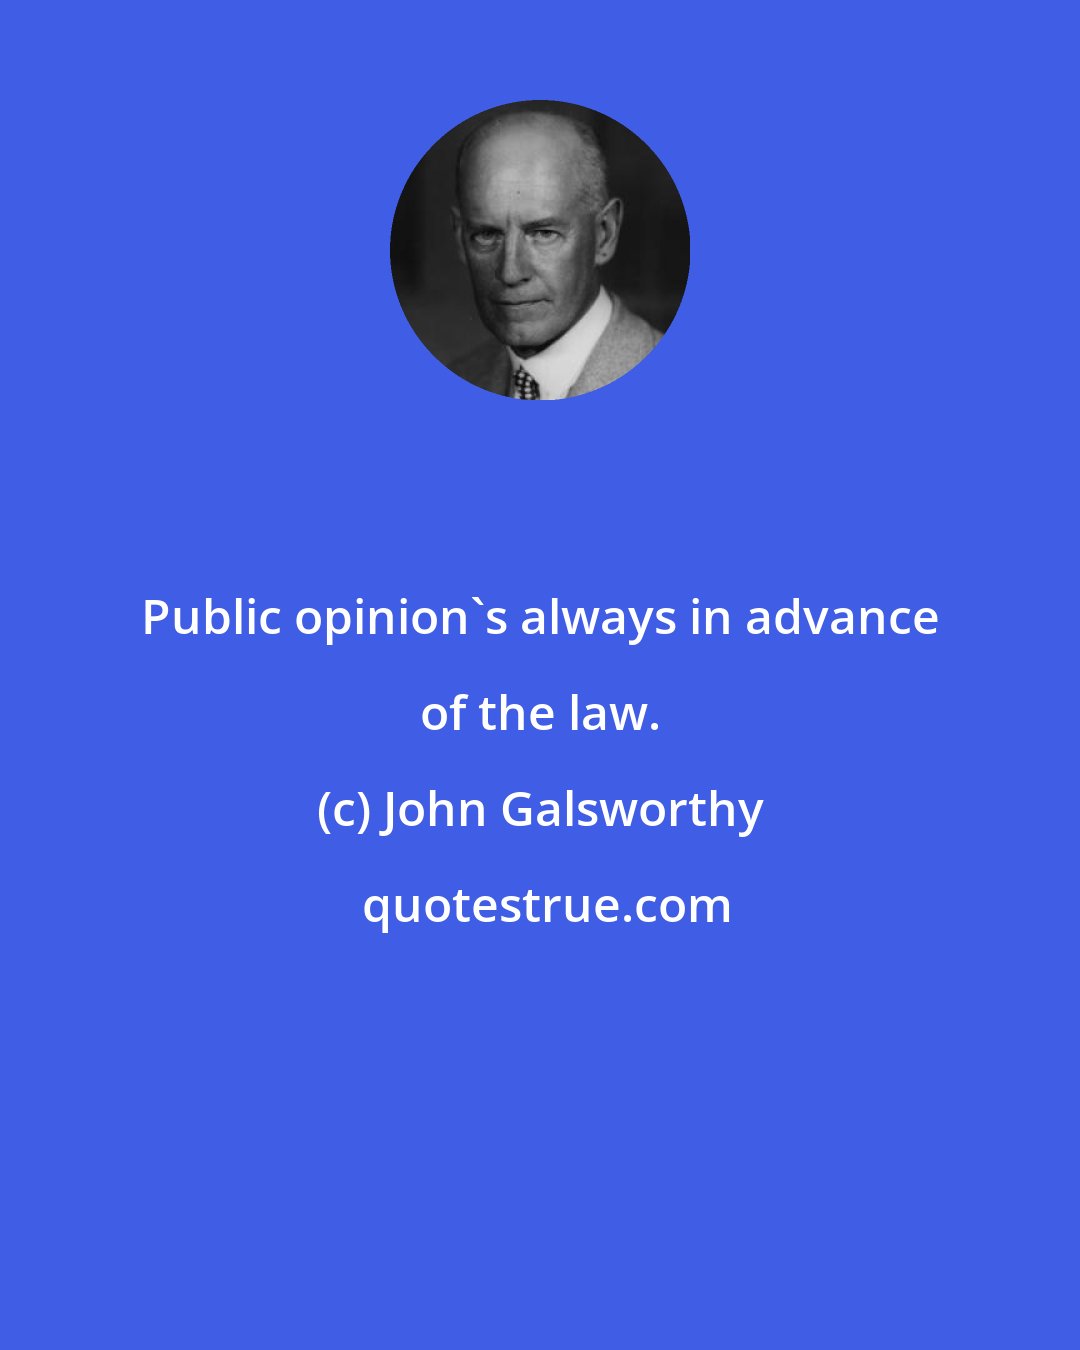 John Galsworthy: Public opinion's always in advance of the law.